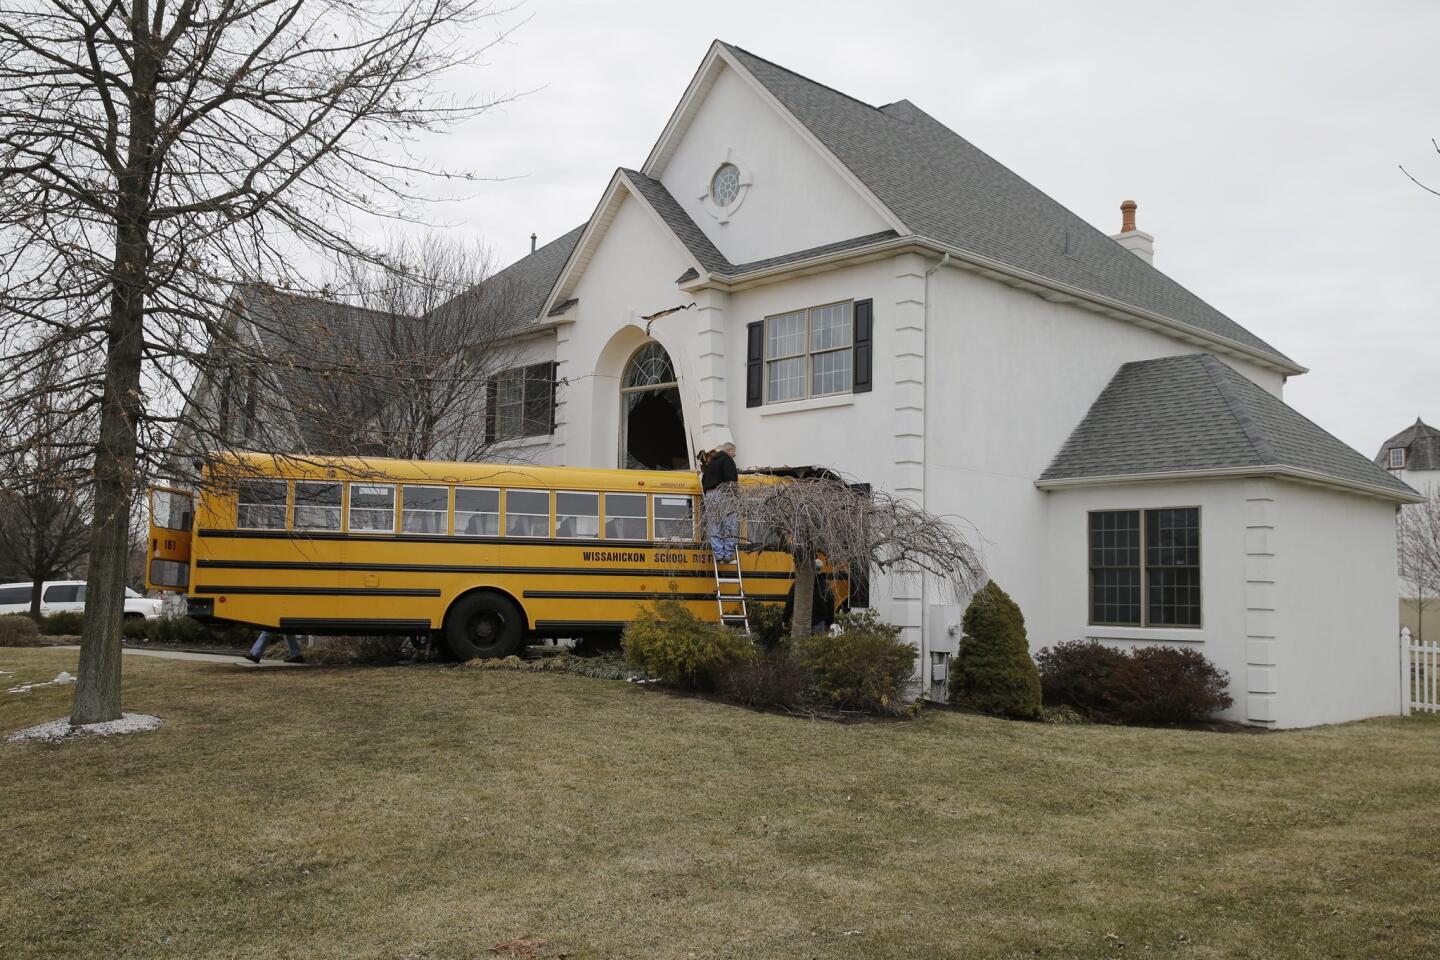 A school bus with nine children aboard crashed into a home in Blue Bell, Pa., Tuesday morning. No one was hurt, including a resident who was home at the time.